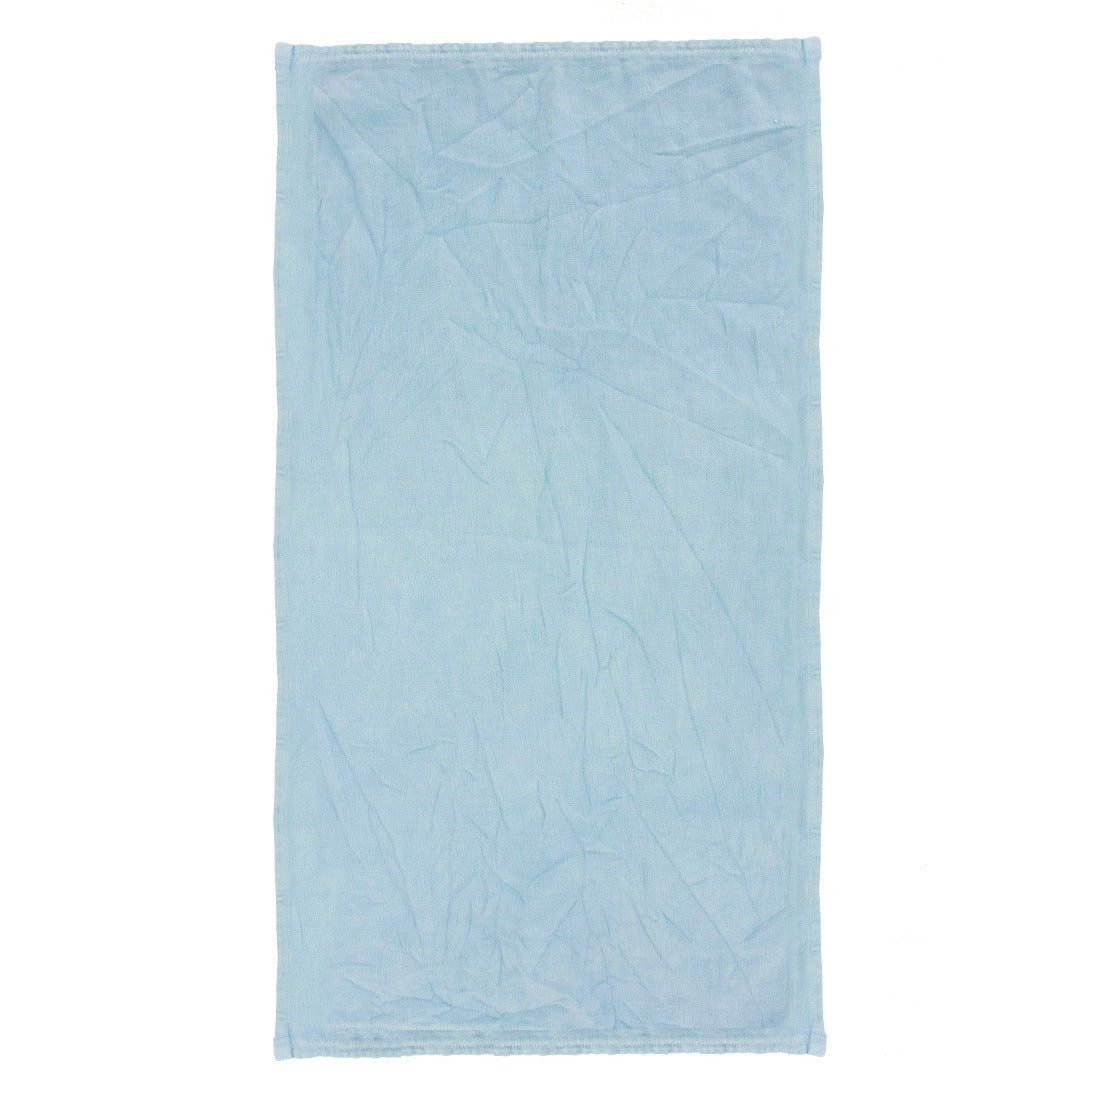 Recycled Surgical Towels Blue Jumbo View